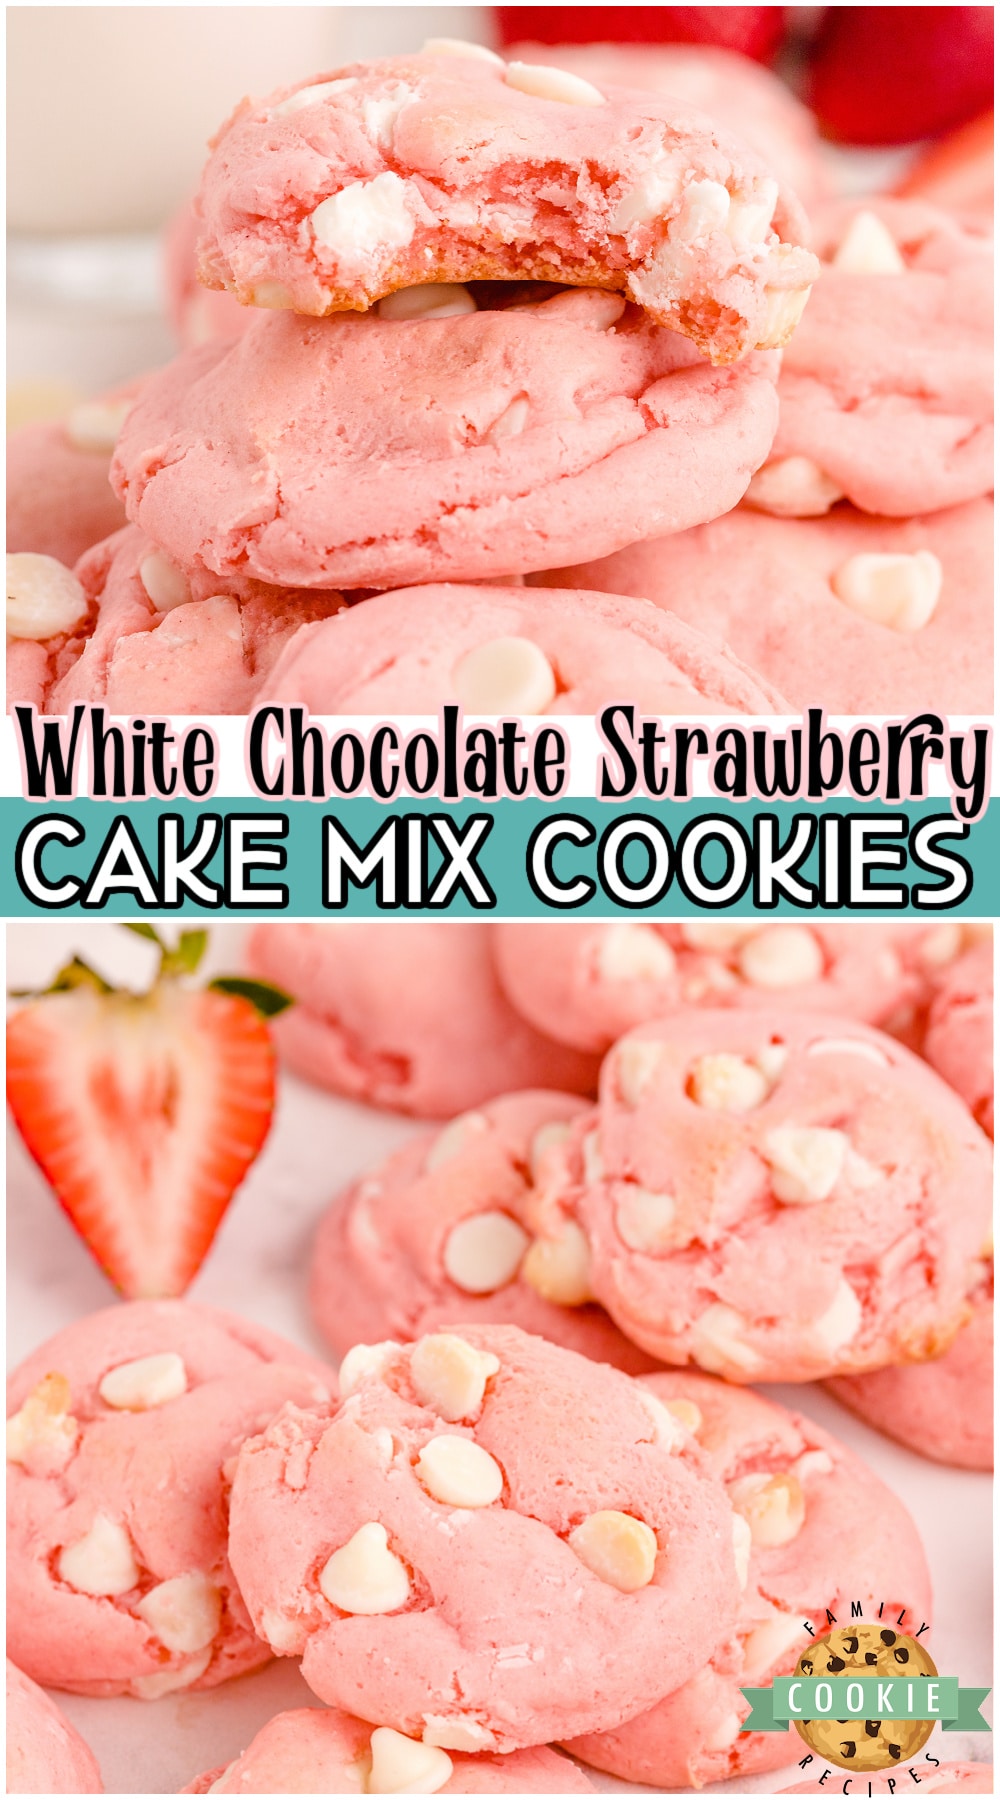 White Chocolate Strawberry Cake Mix Cookies are soft & chewy cookies that need just 4 ingredients! Lovely pink Strawberry Cake Mix cookie recipe that needs a cake mix, 2 eggs, oil and white chocolate chips! 